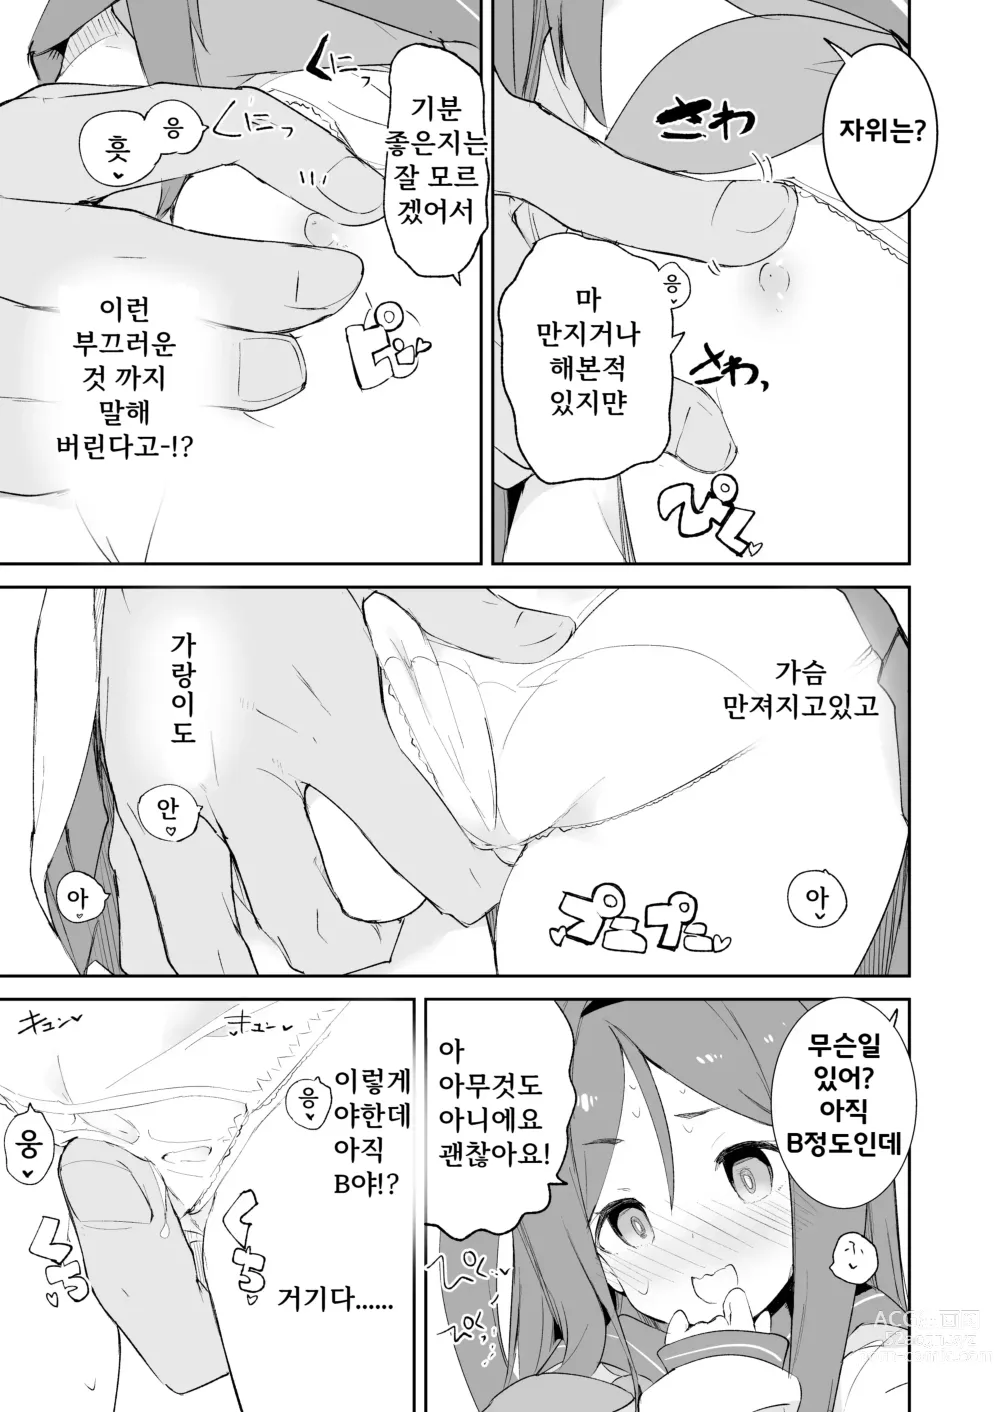 Page 6 of doujinshi S.S.S.X